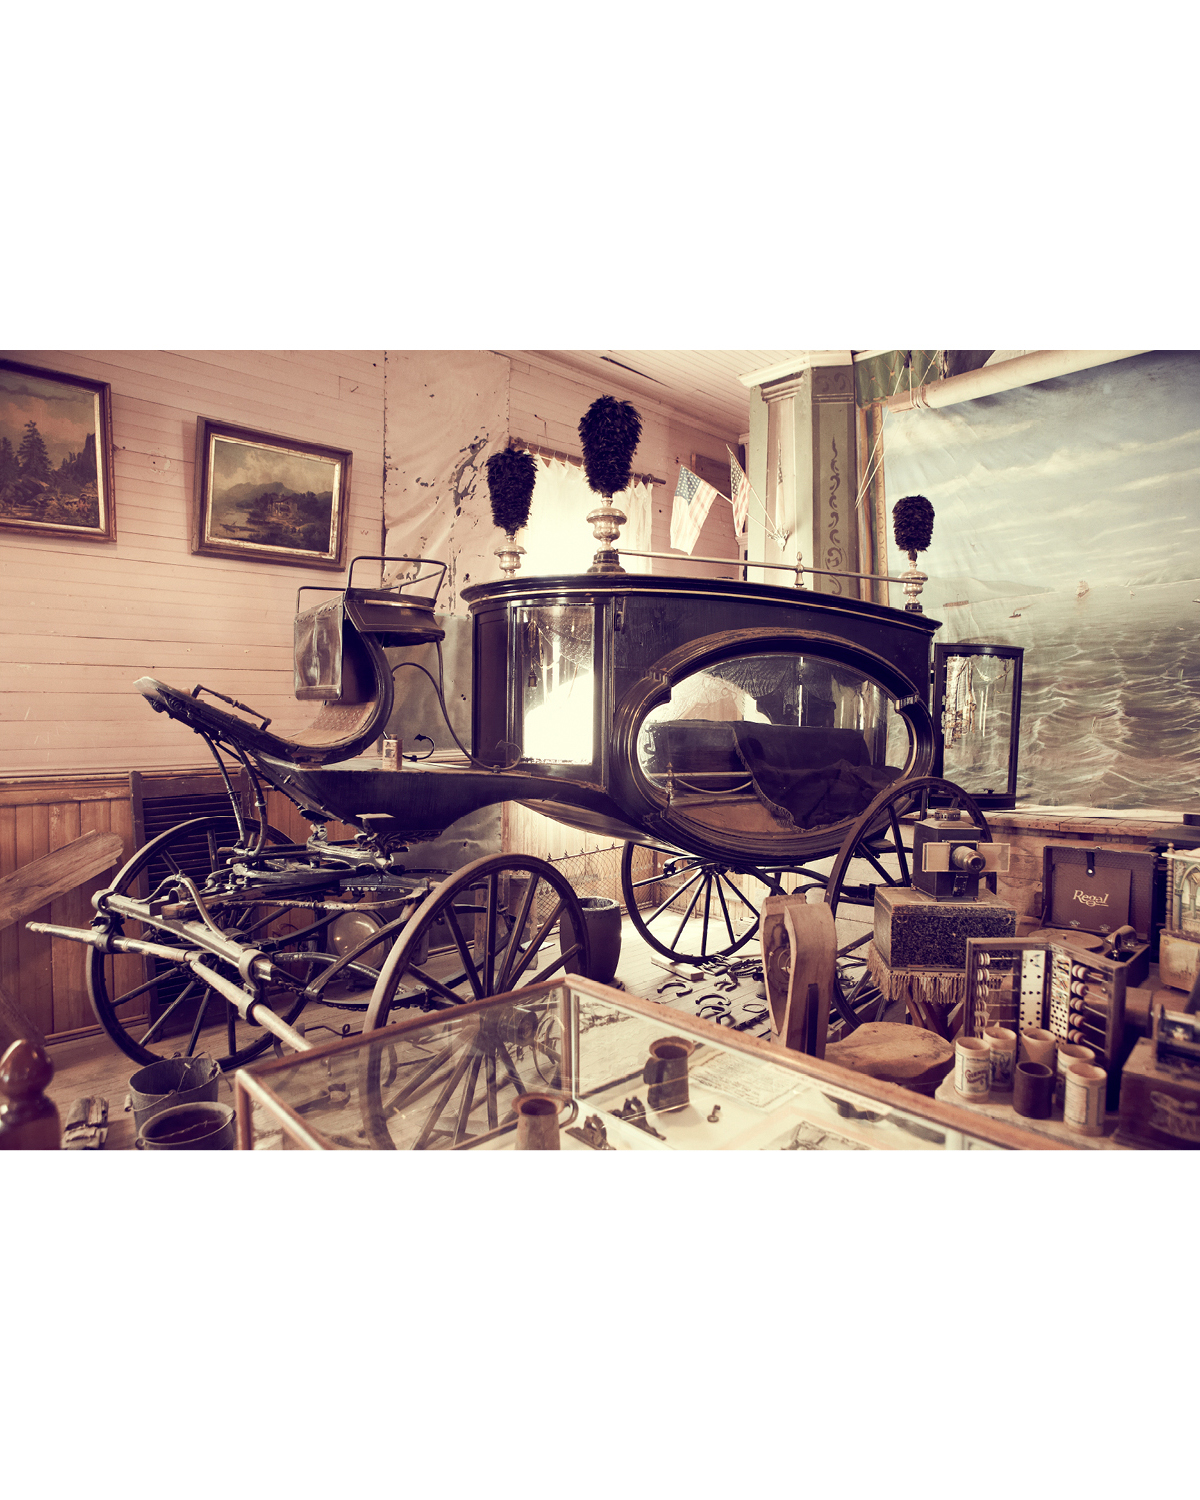  ANTIQUES ONCE BELONGING TO BODIE RESIDENTS 